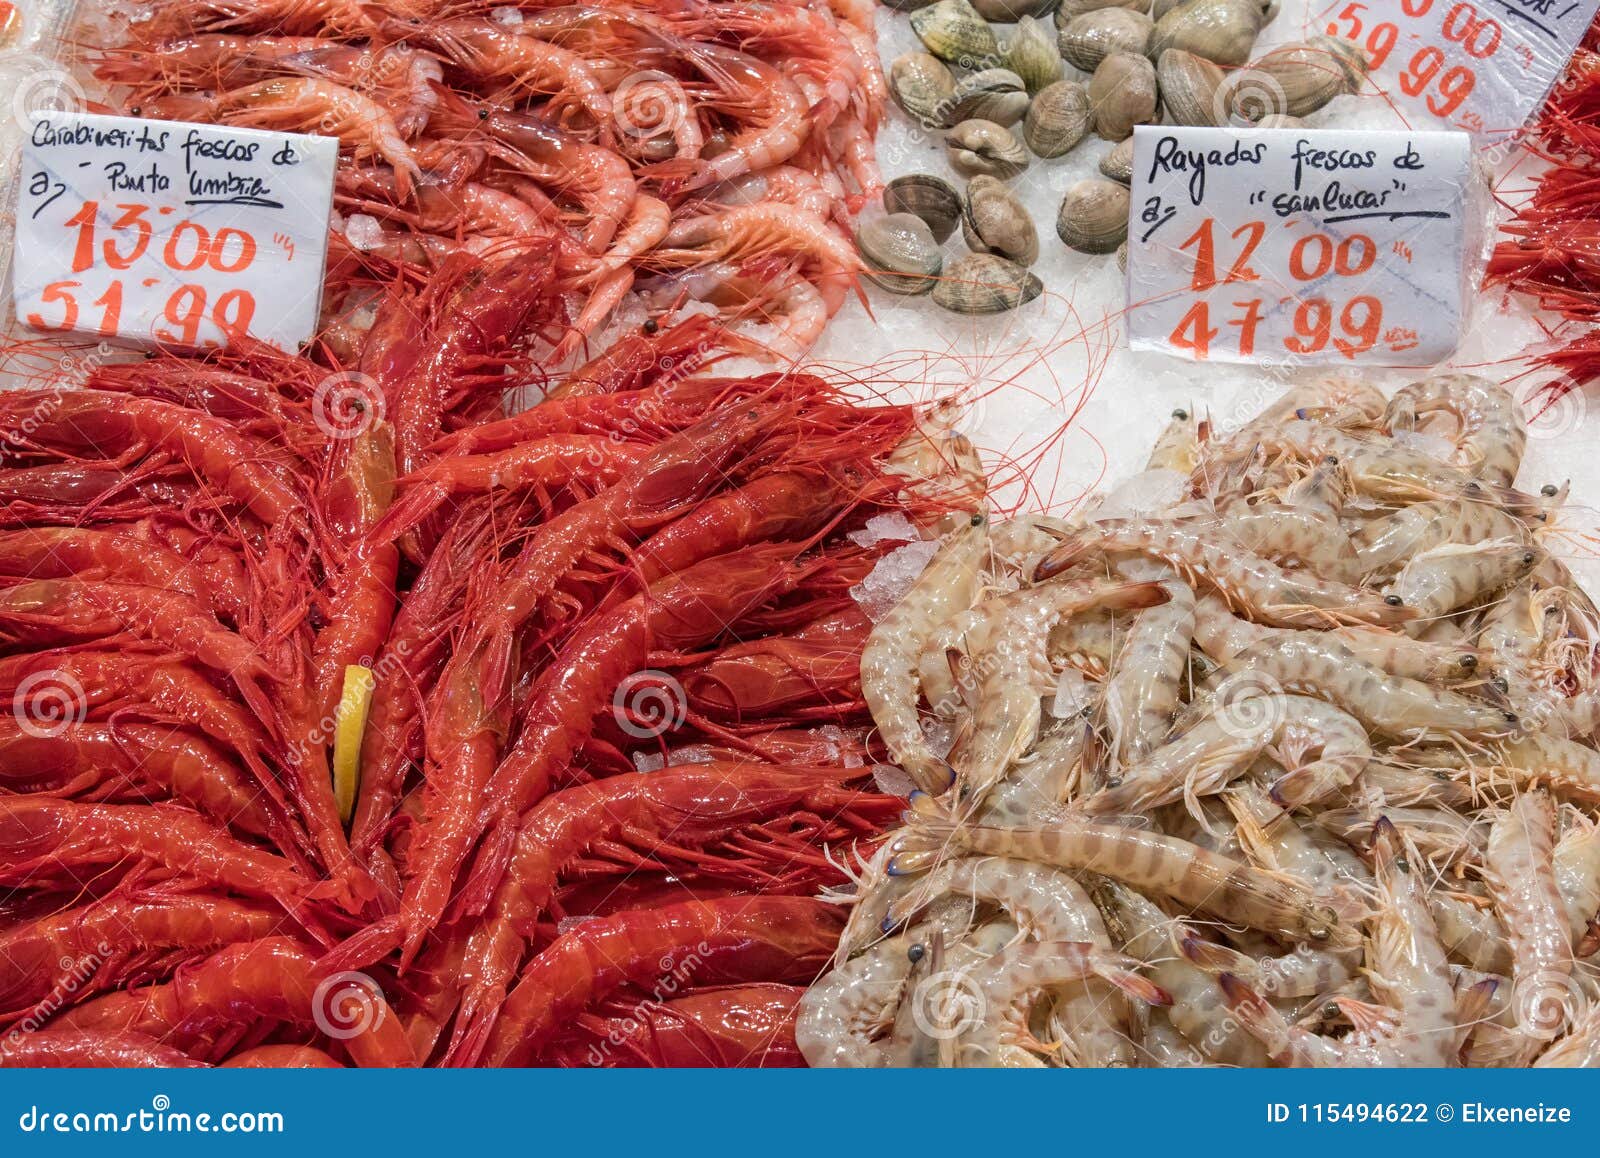 different kinds of prawns